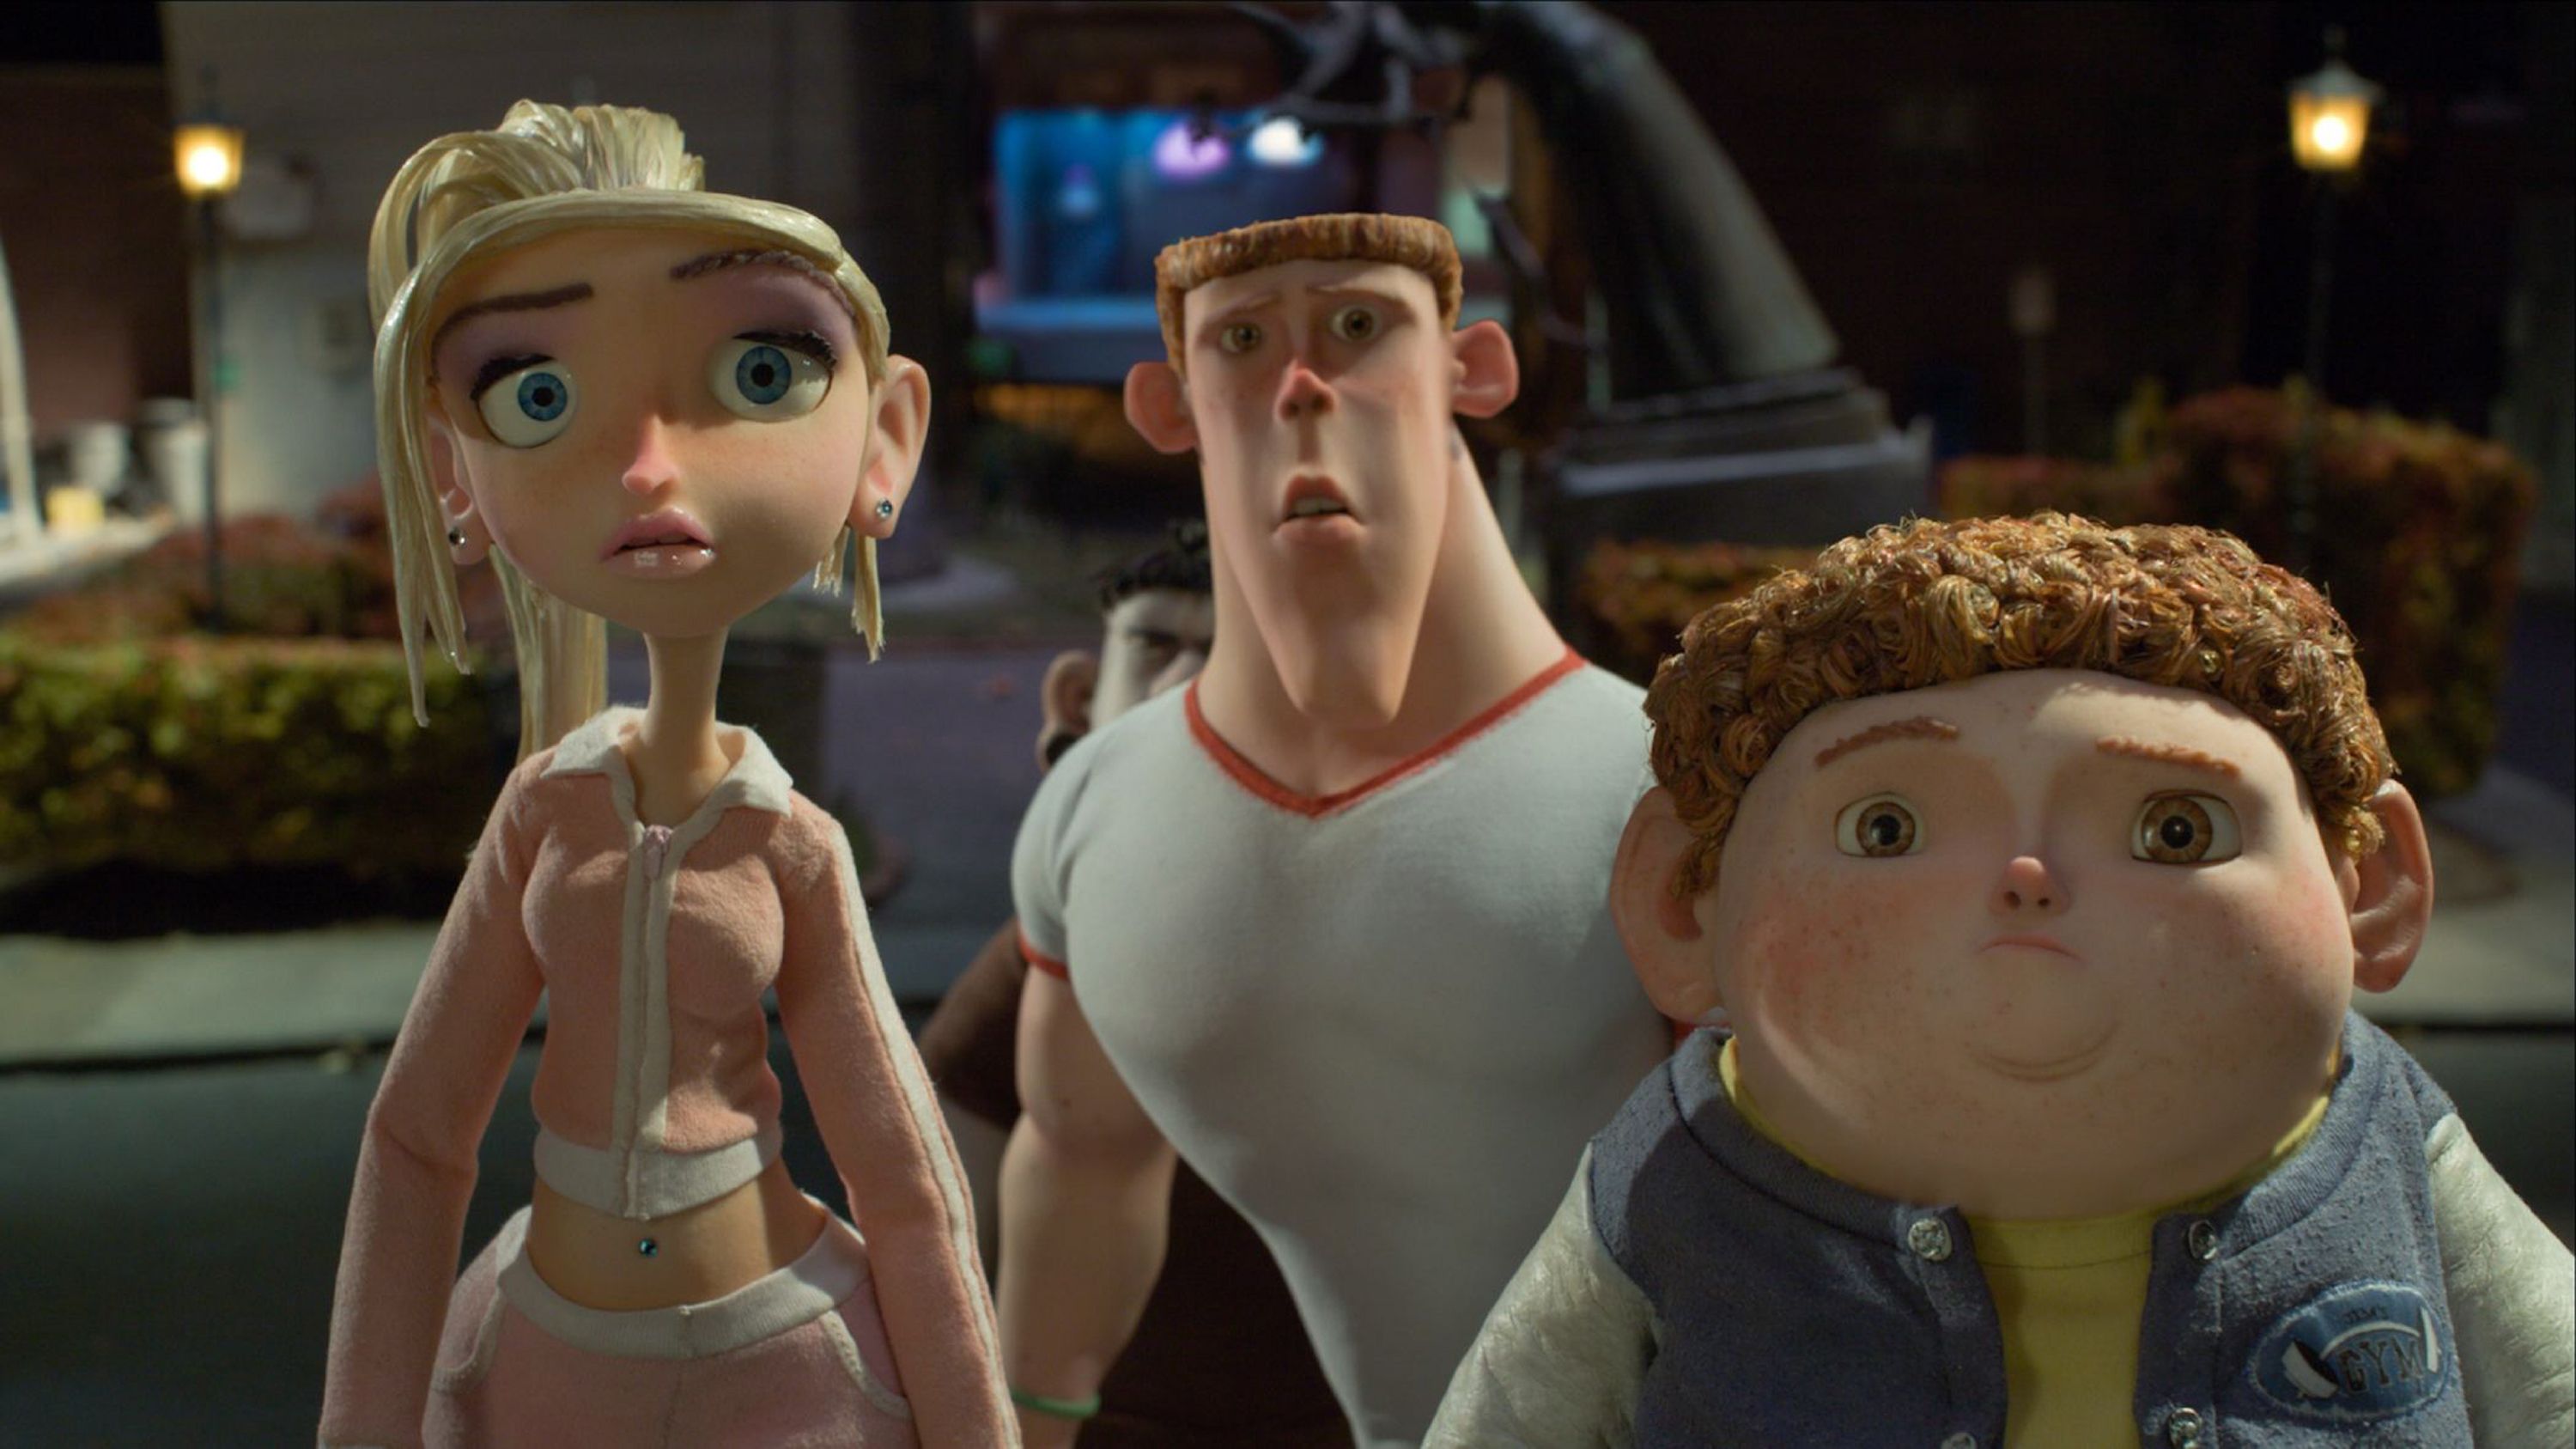 Paranorman wallpapers, Movie, HQ Paranorman pictures.